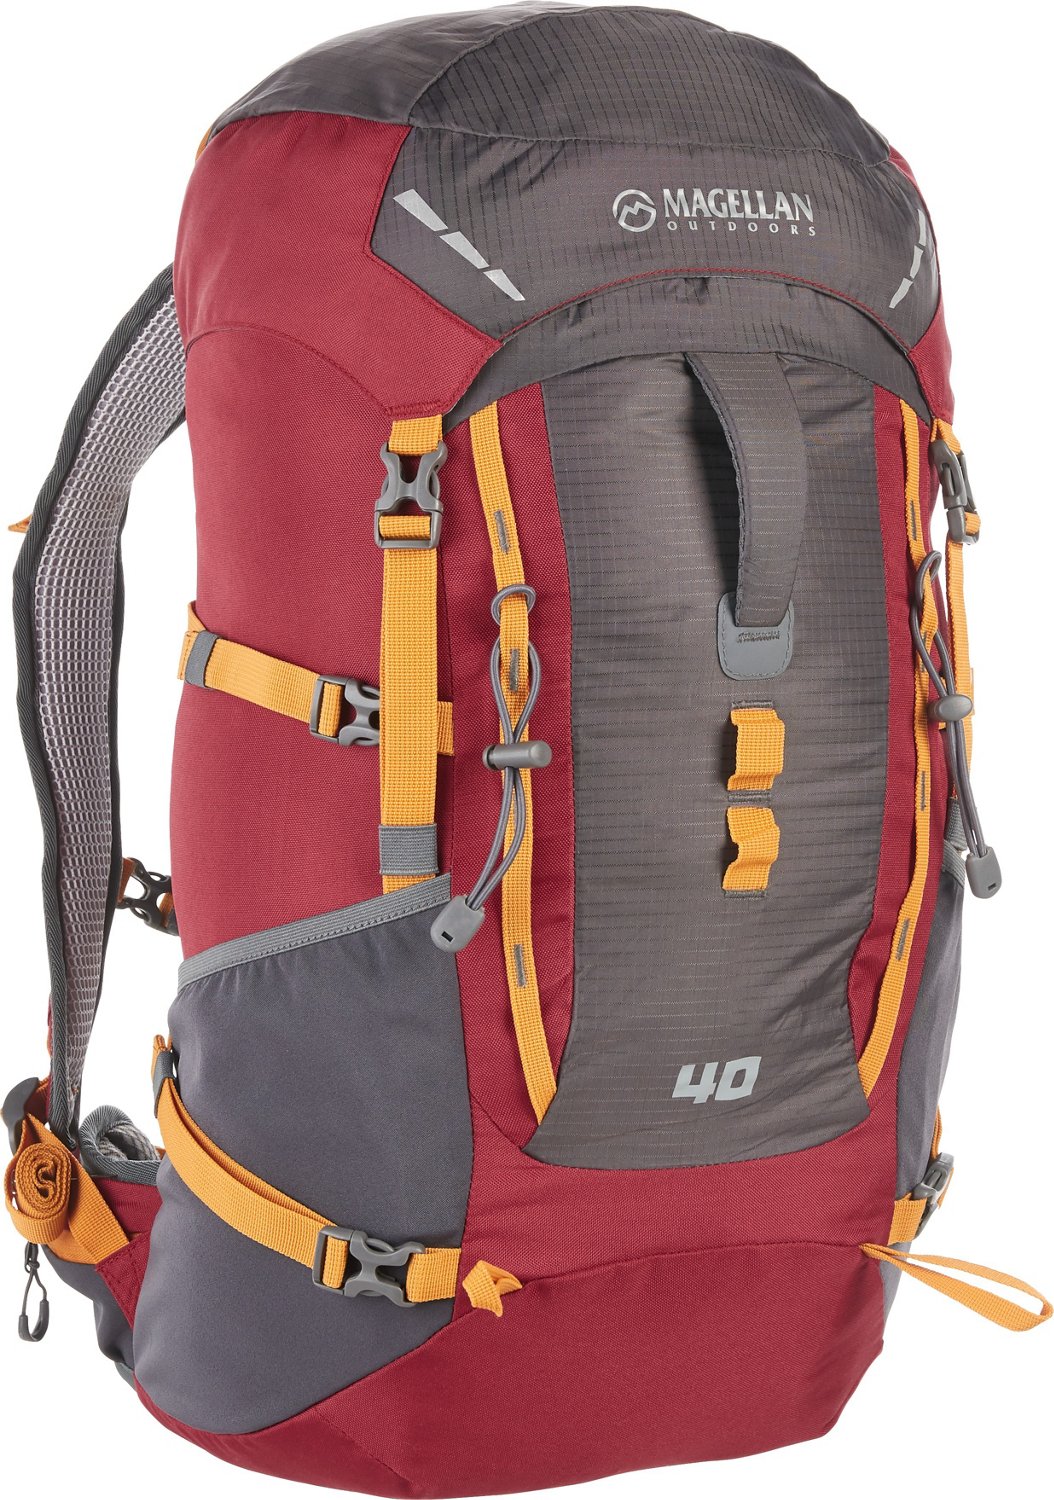 Magellan Outdoors 40L Technical Frame Backpack                                                                                   - view number 1 selected